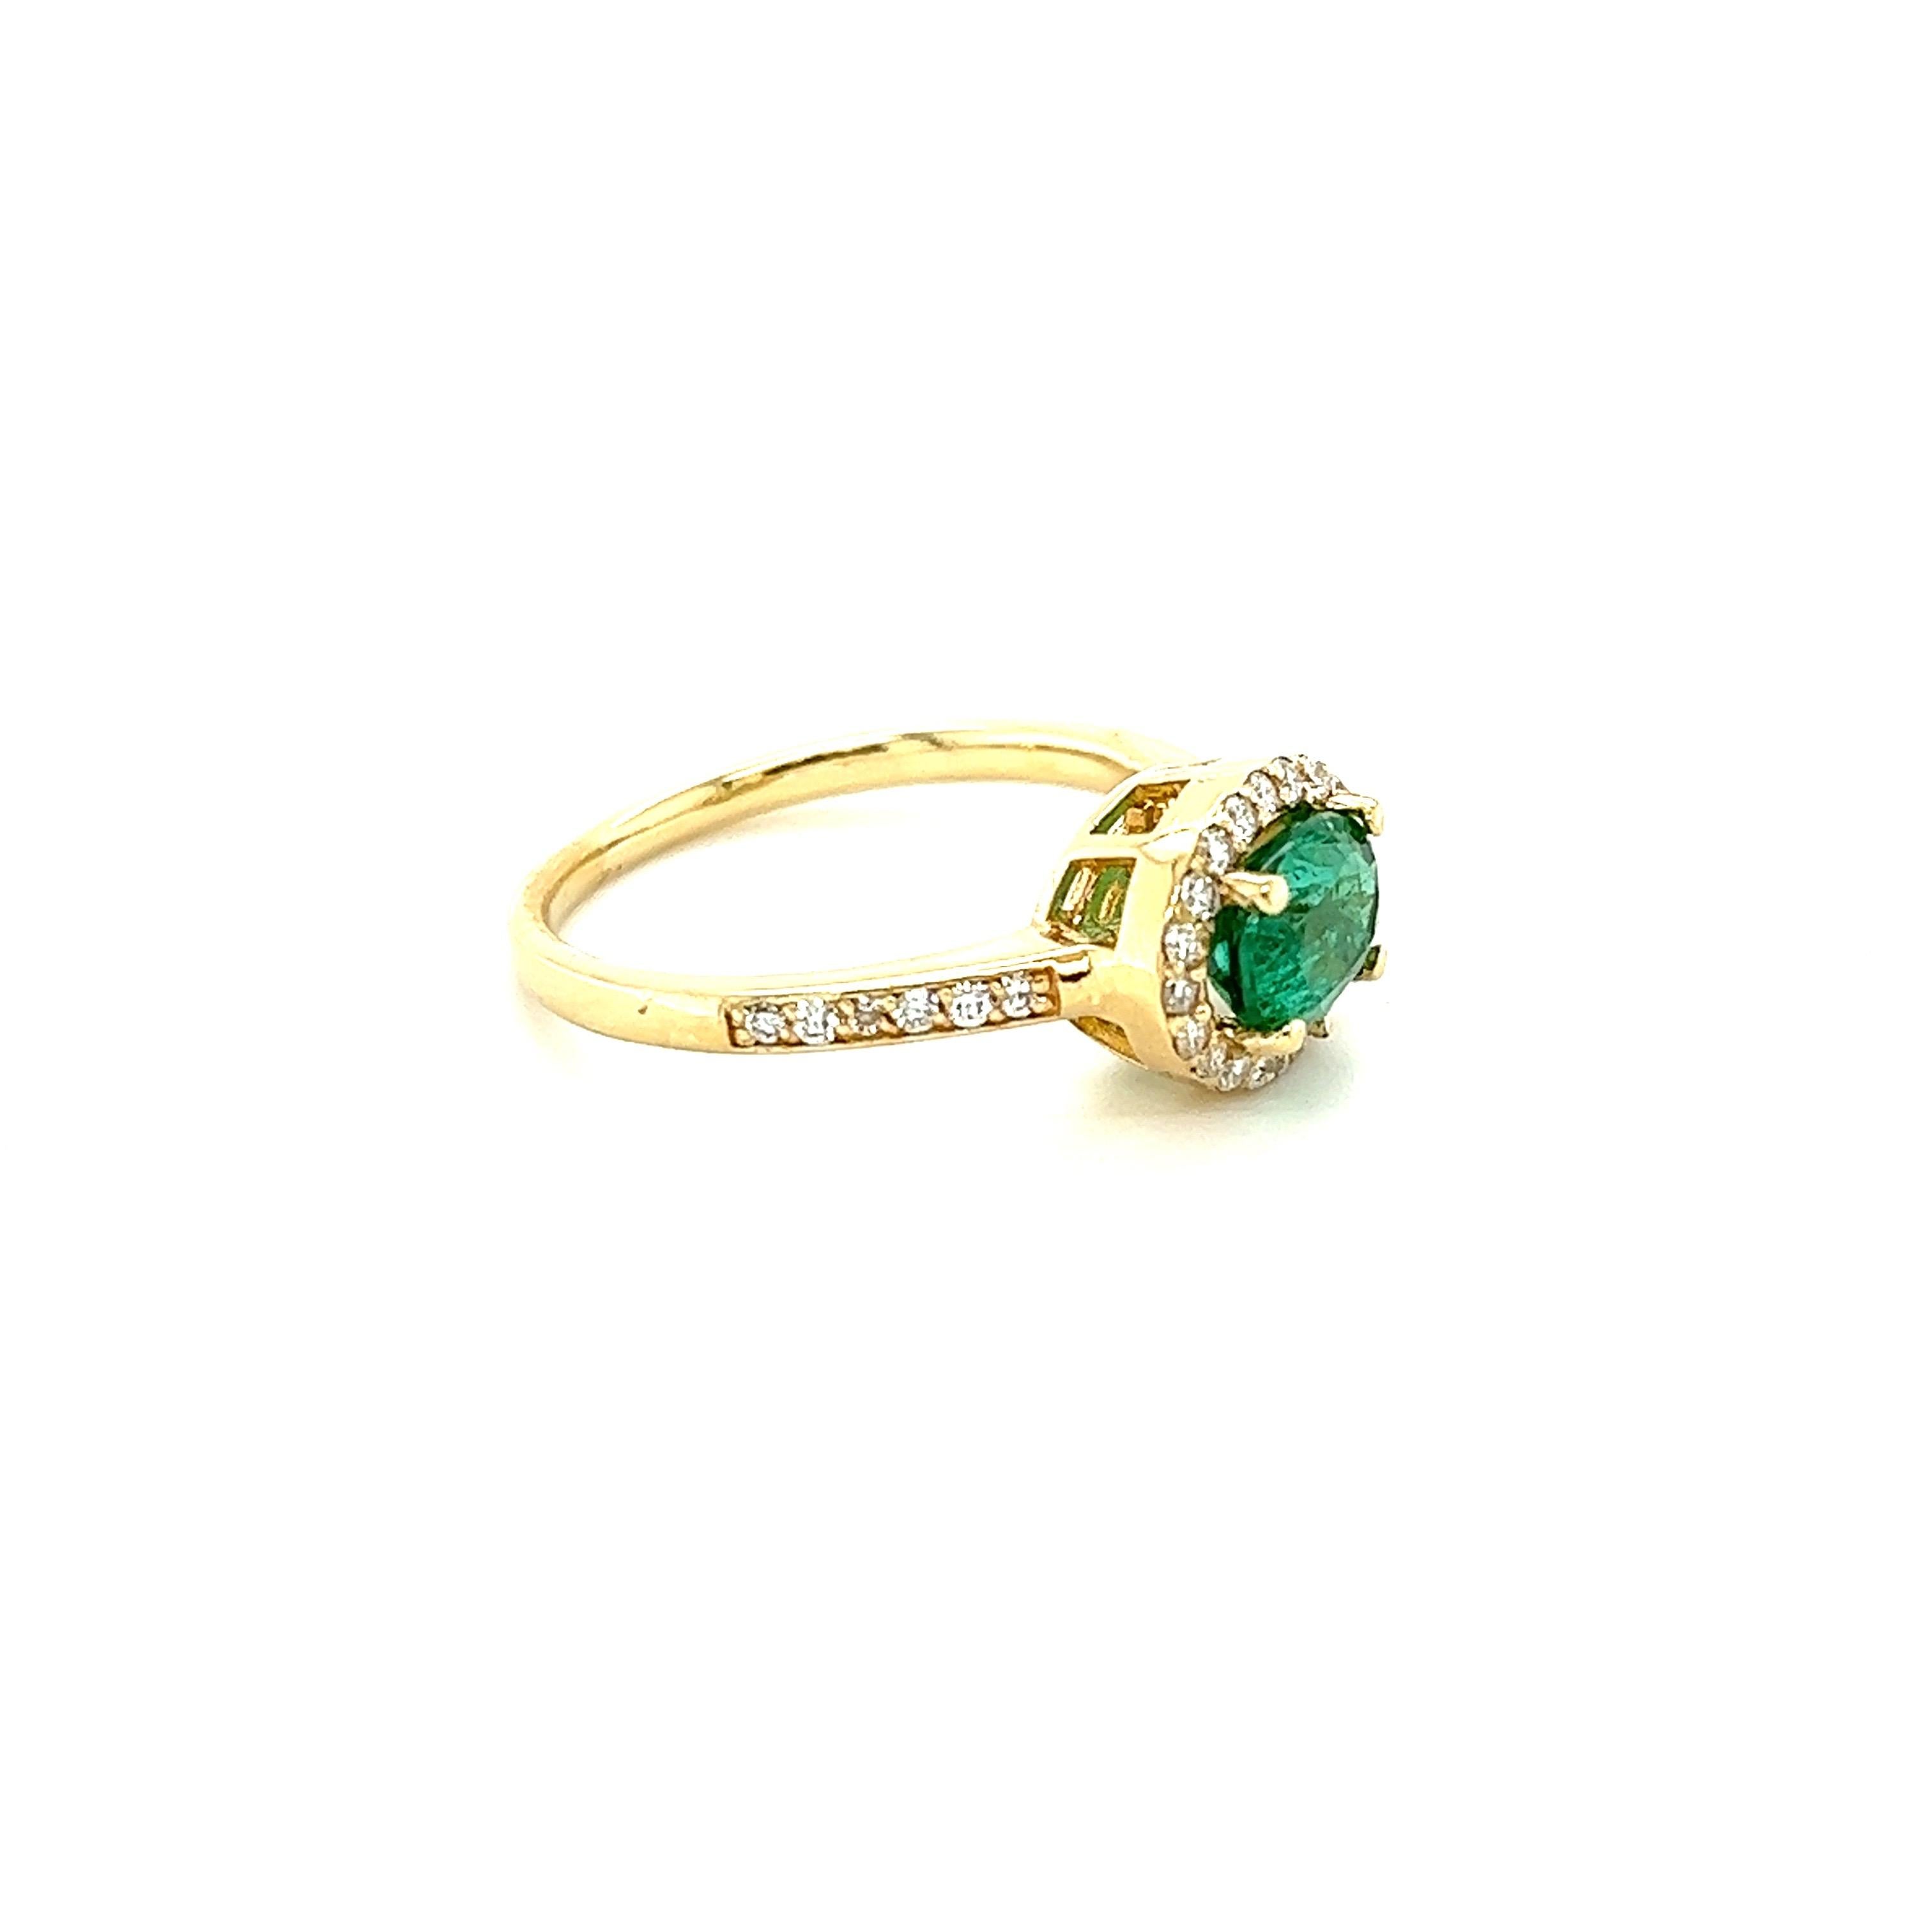 This ring has a 1.00 Carat Oval Cut Emerald and is surrounded by 32 Round Cut Diamonds that weigh 0.32 Carats. (Clarity: VS, Color: H) The total carat weight of the ring is 1.32 carats. 
The Oval Cut Emerald measures at approximately 7 mm x 5 mm.